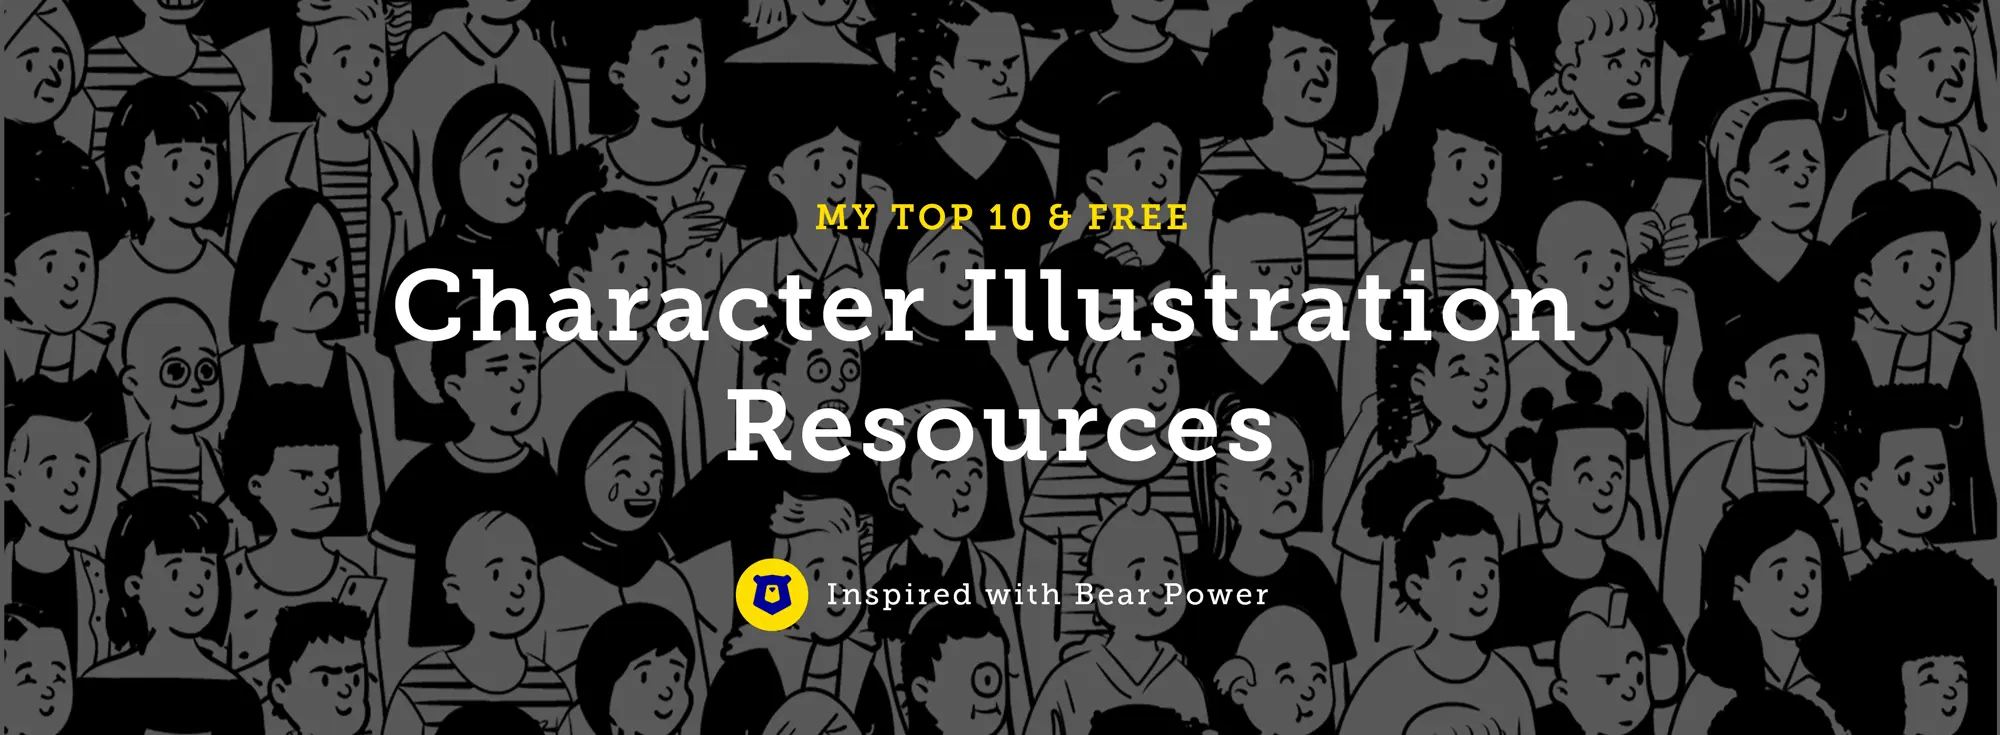 My Top 10+ & Free 🤯 Character Illustration Resources 🏆 ✍️ 💪